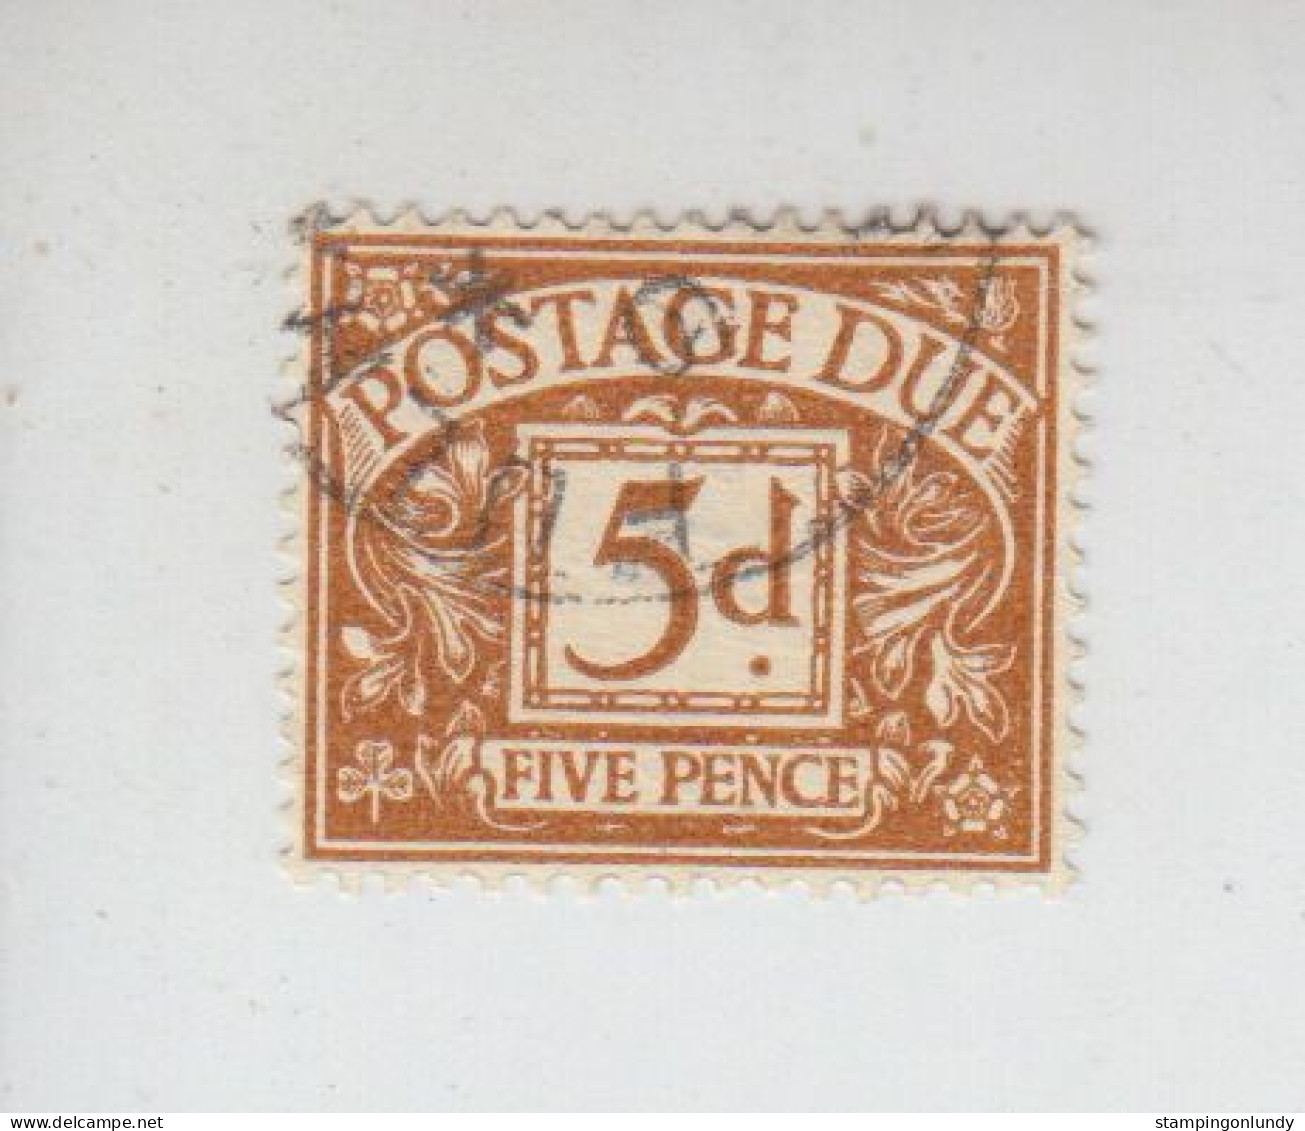 02B. Postage Due Used 5d SG. D16. Retirment Sale Price Slashed! - Postage Due